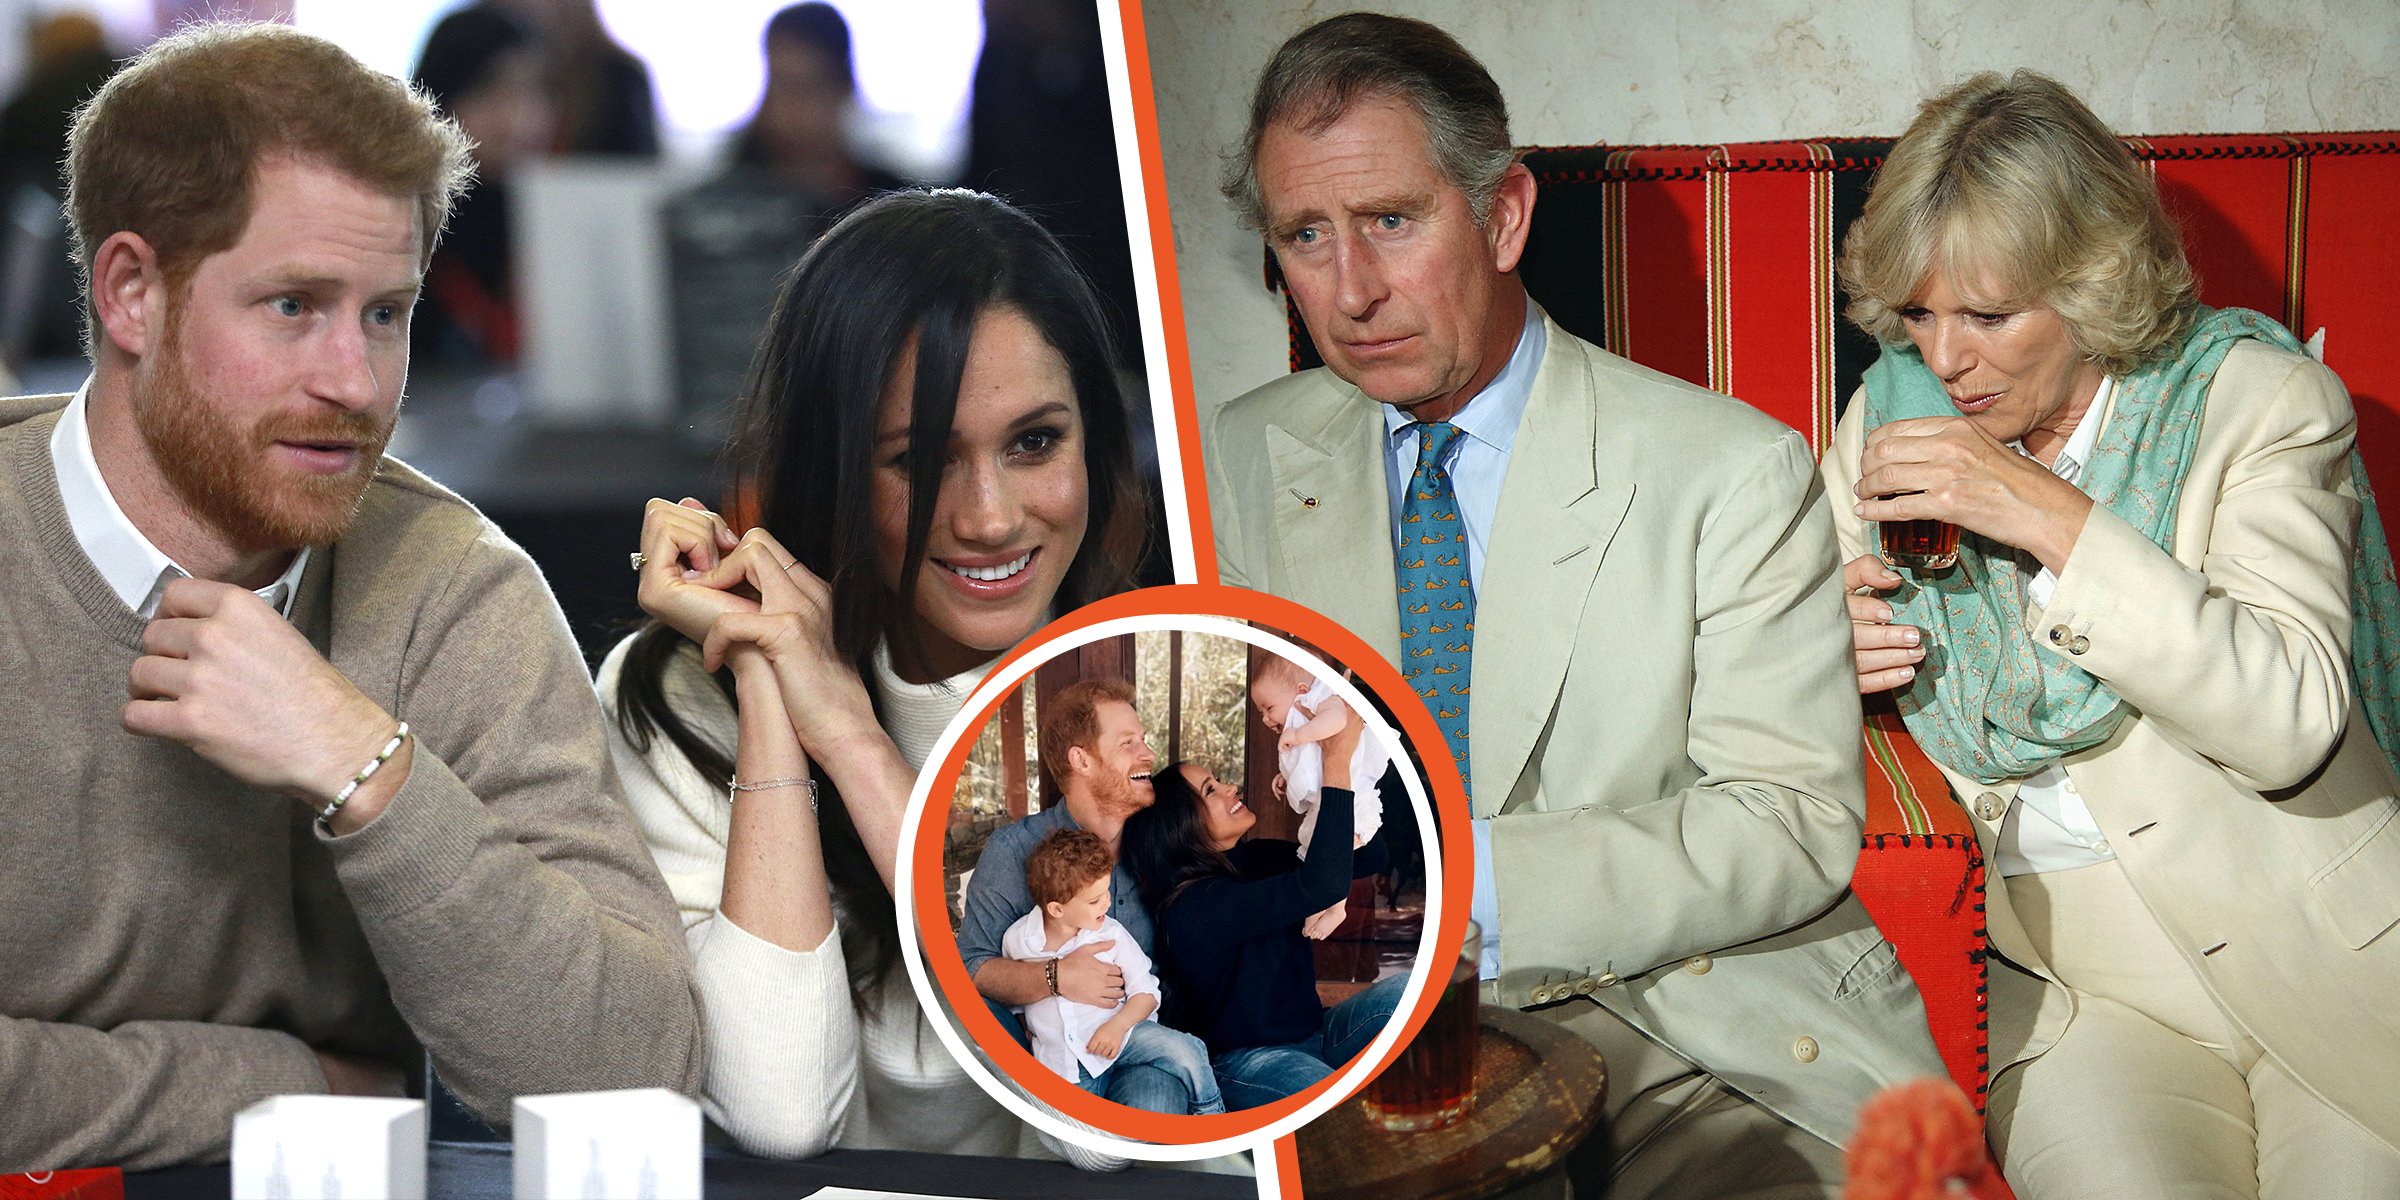 Meghan Markle and Prince Harry | Meghan Markle, Prince Harry, Archie, and Lilibet | Queen Consort Camilla and King Charles III | Source: Getty Images | Instagram.com/alexilubomirski